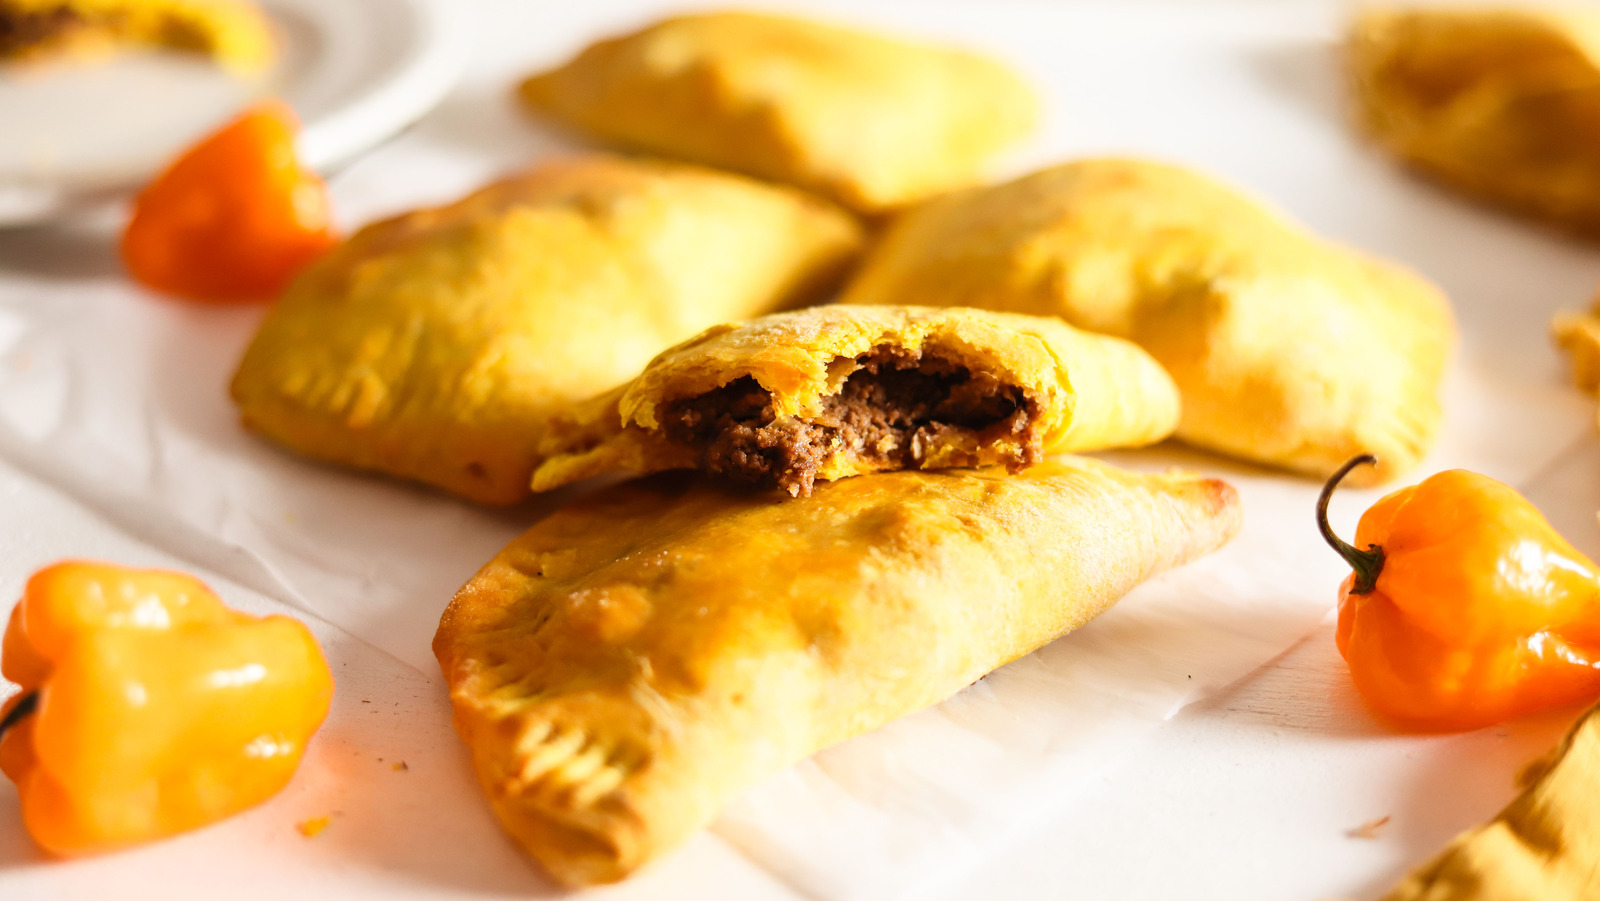 Baked Jamaican Beef Patty Recipe – Tasting Table